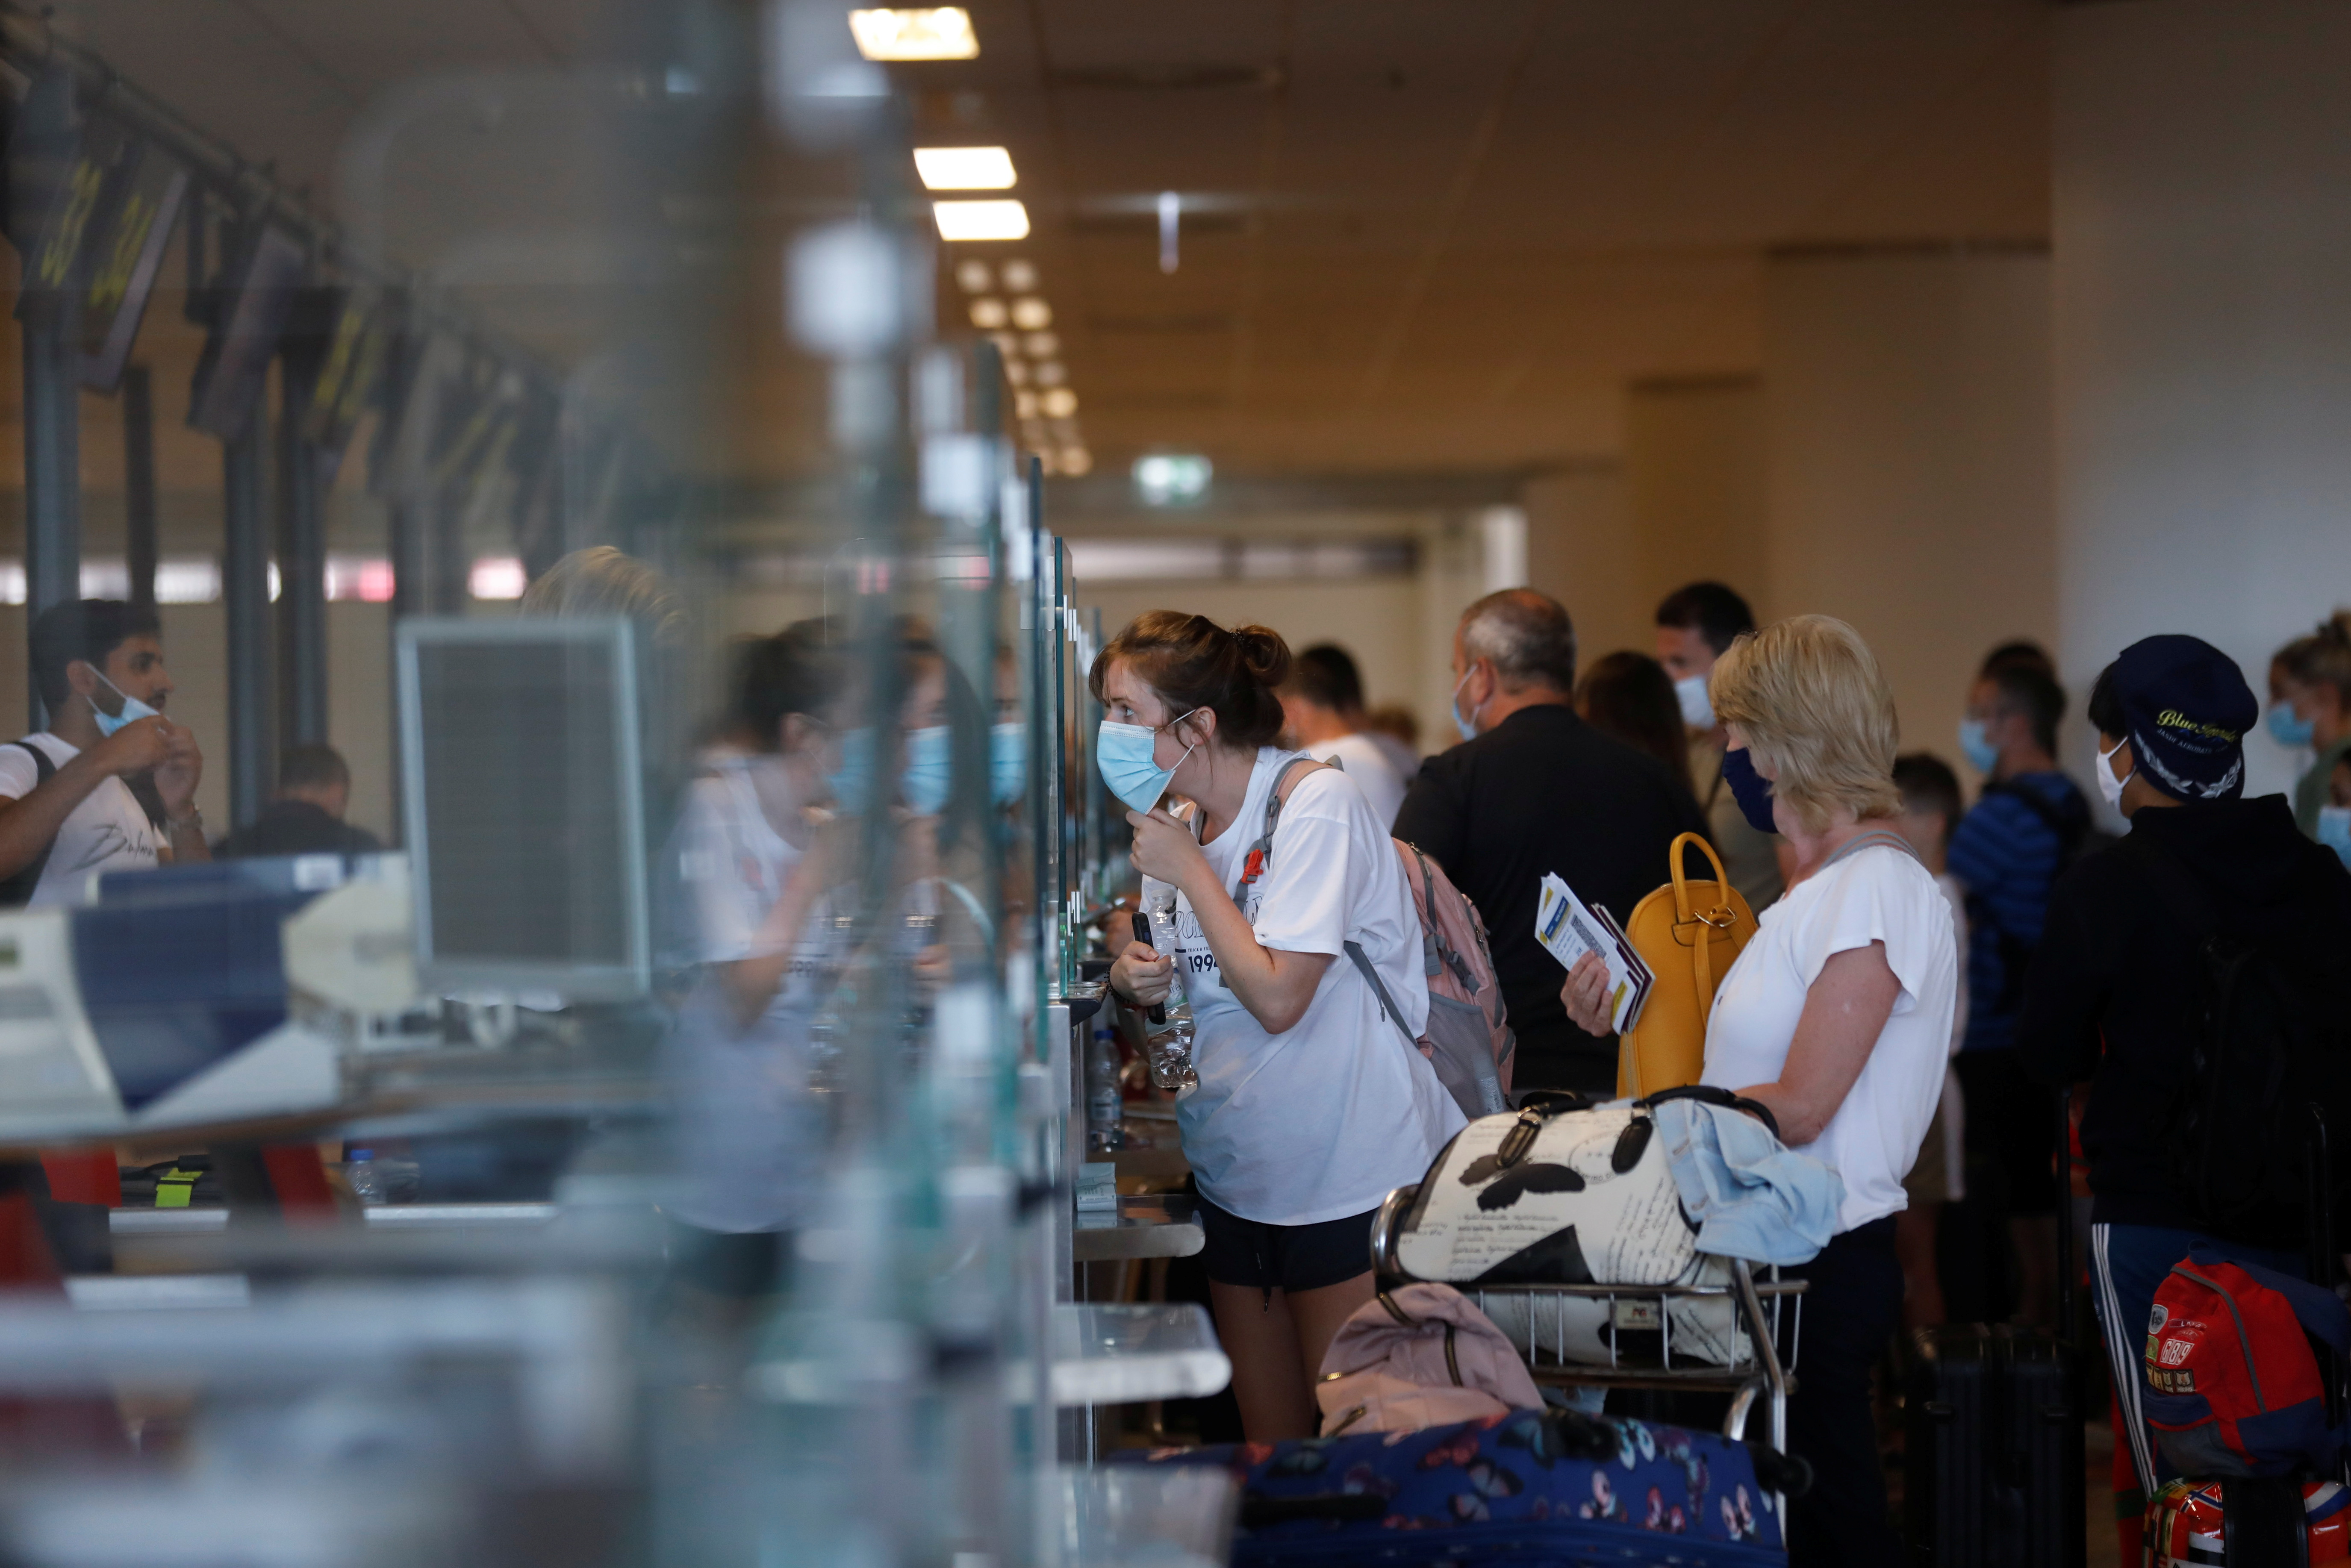 People queue at check in desks at Faro airport amid the COVID-19 pandemic, in Faro